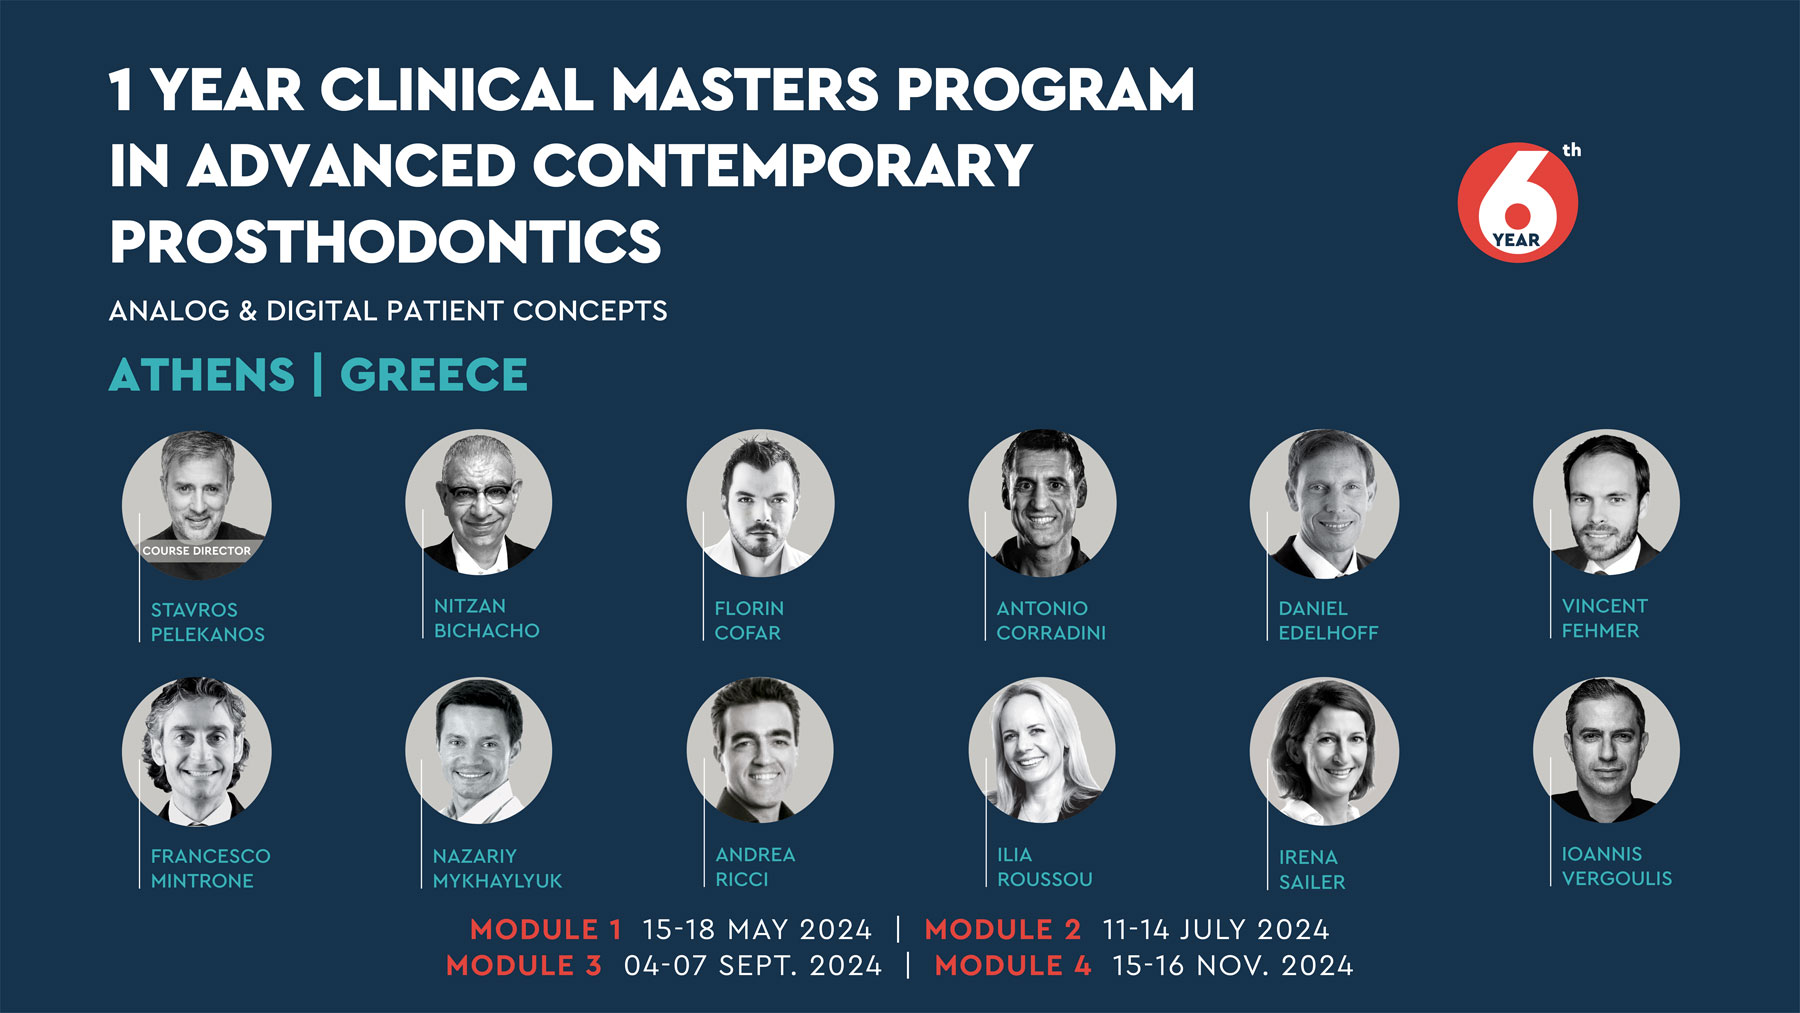 1 YEAR CLINICAL MASTERS PROGRAM IN ADVANCED CONTEMPORARY PROSTHODONTICS (2024)